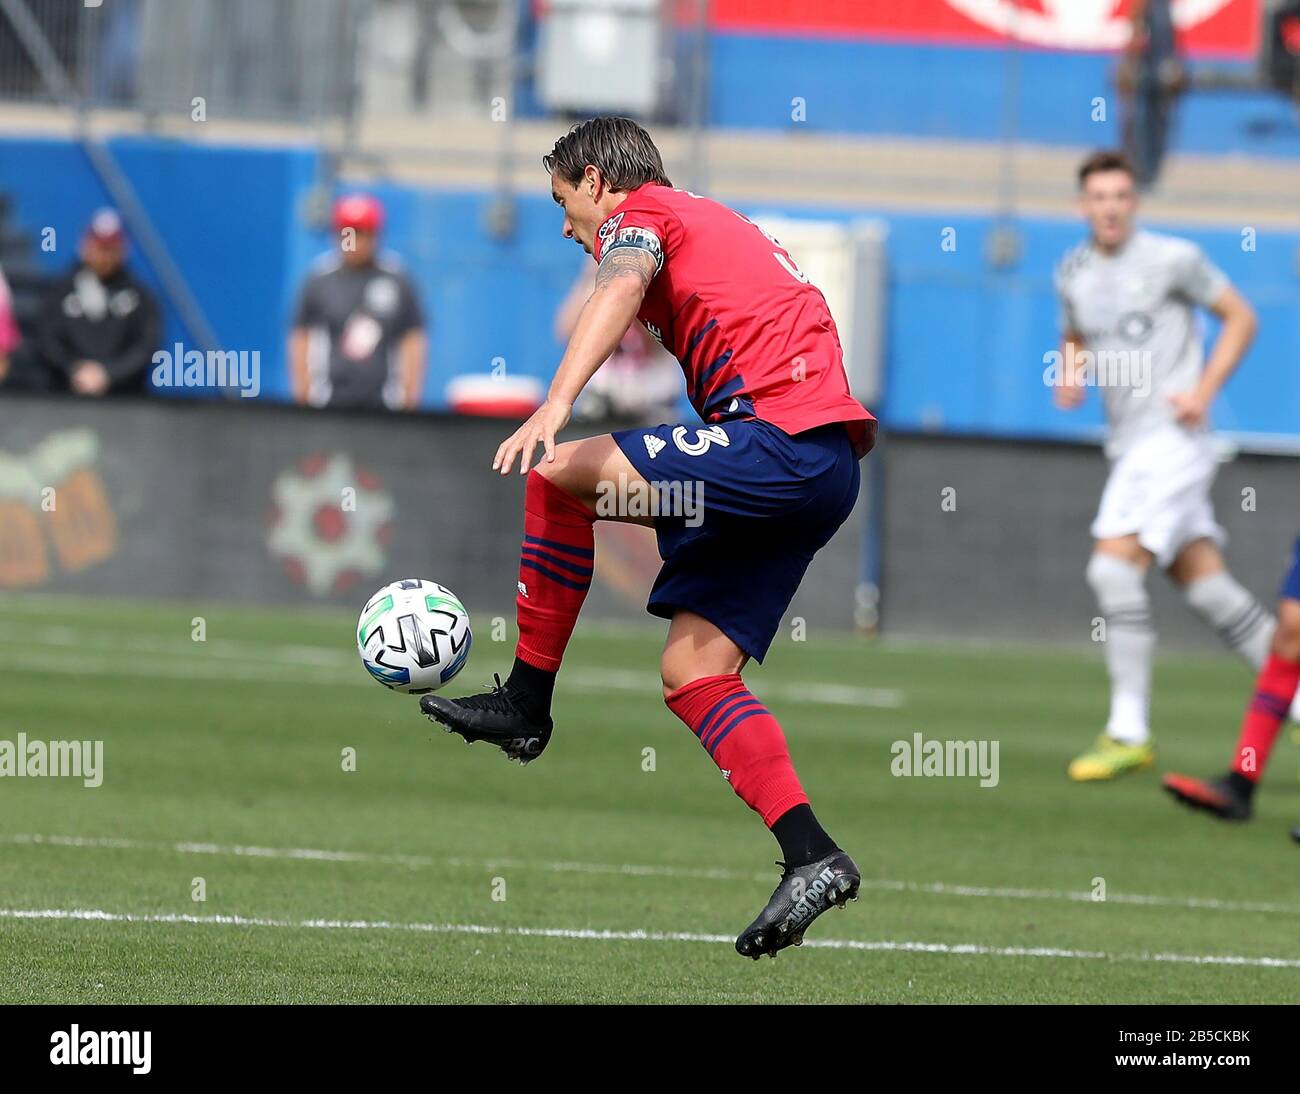 FC Dallas Captain Reto Ziegler (5) during a MLS soccer game against the Montreal Impact, Saturday March 7, 2020, in Frisco, Texas, USA. (Photo by IOS/ESPA-Images) Stock Photo